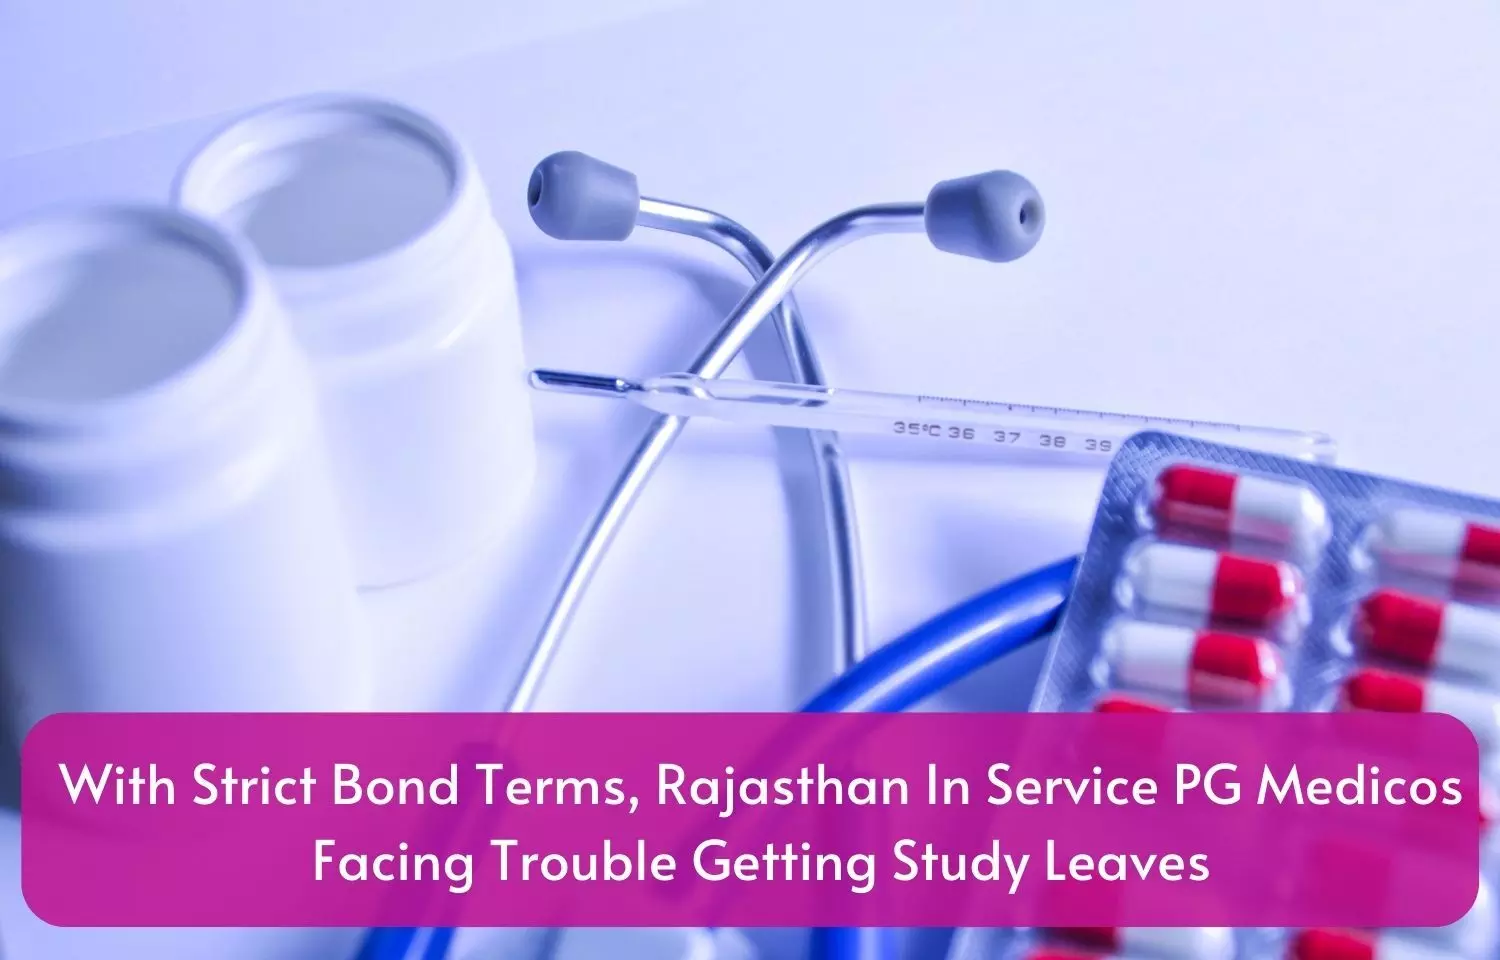 With strict bond terms, Rajasthan in service PG Medicos facing trouble getting study leaves